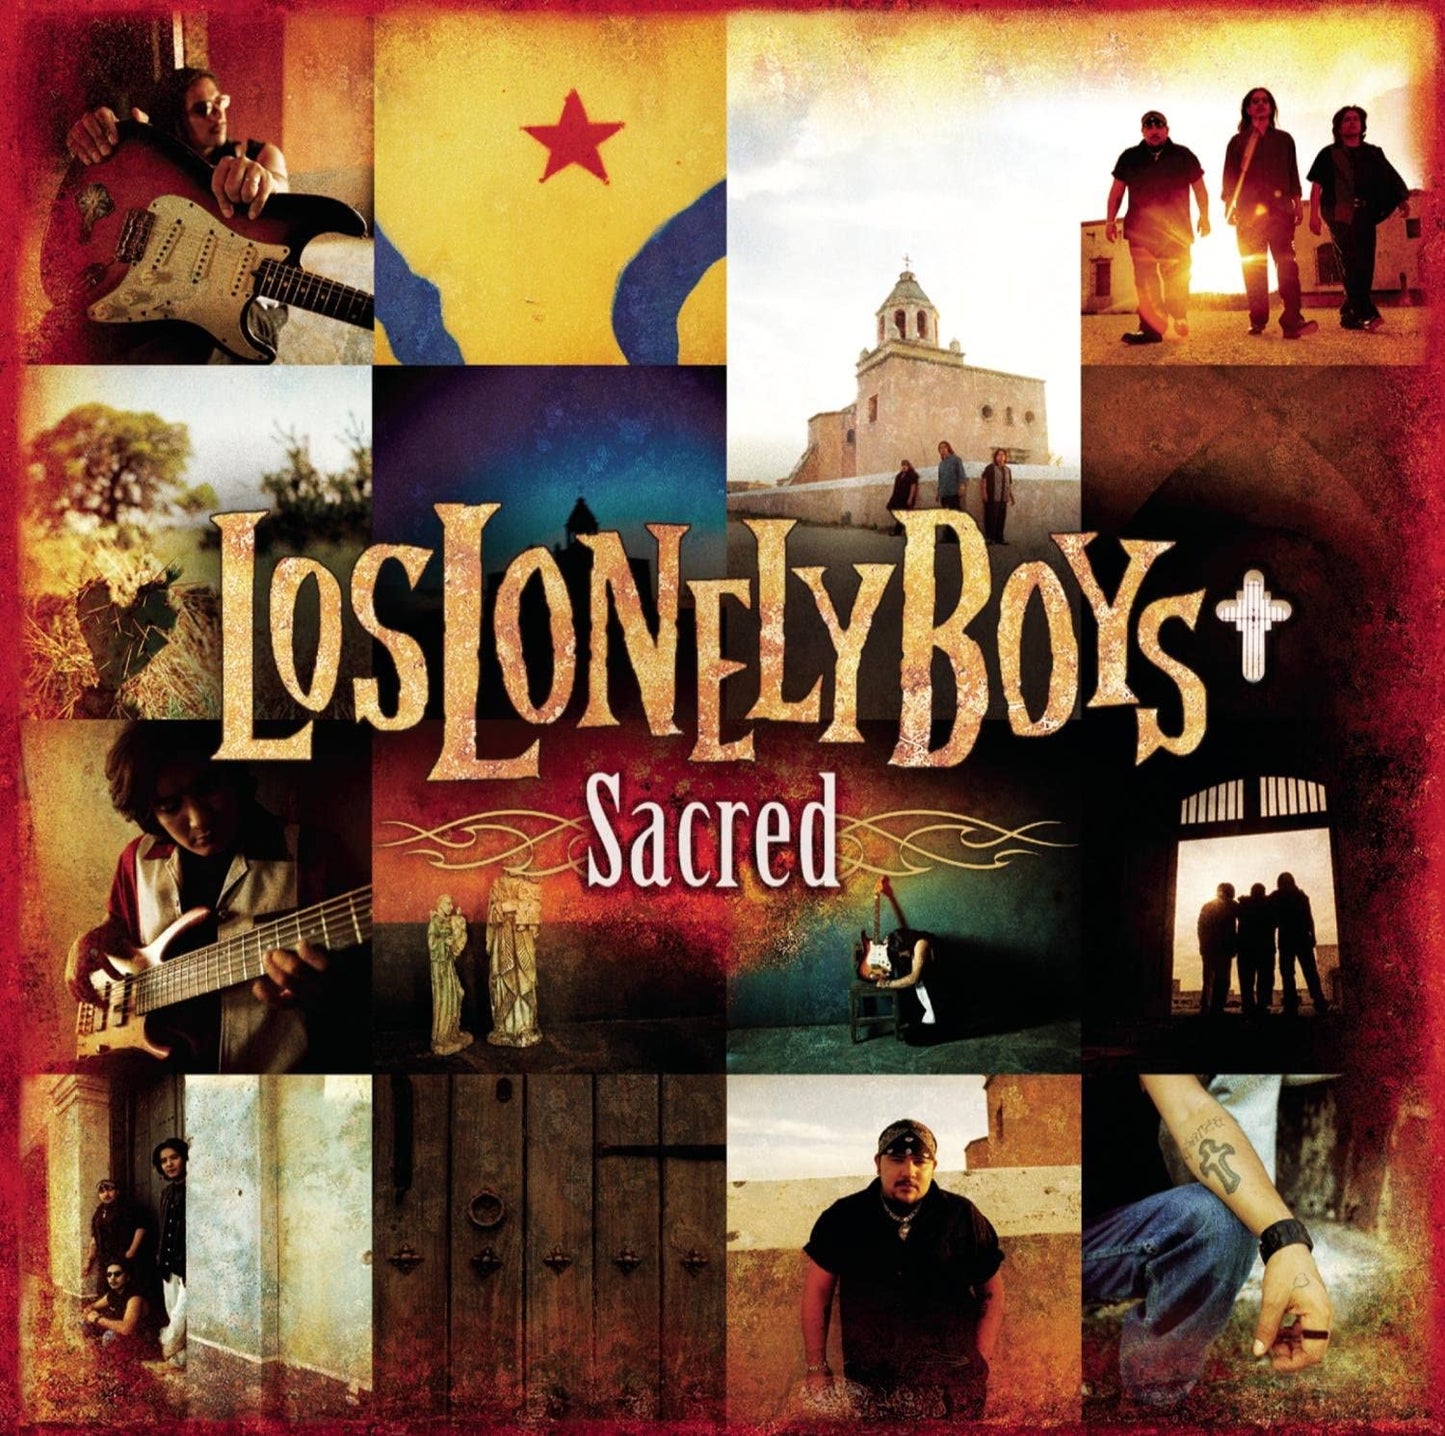 Los Lonely Boys - Sacred - CD